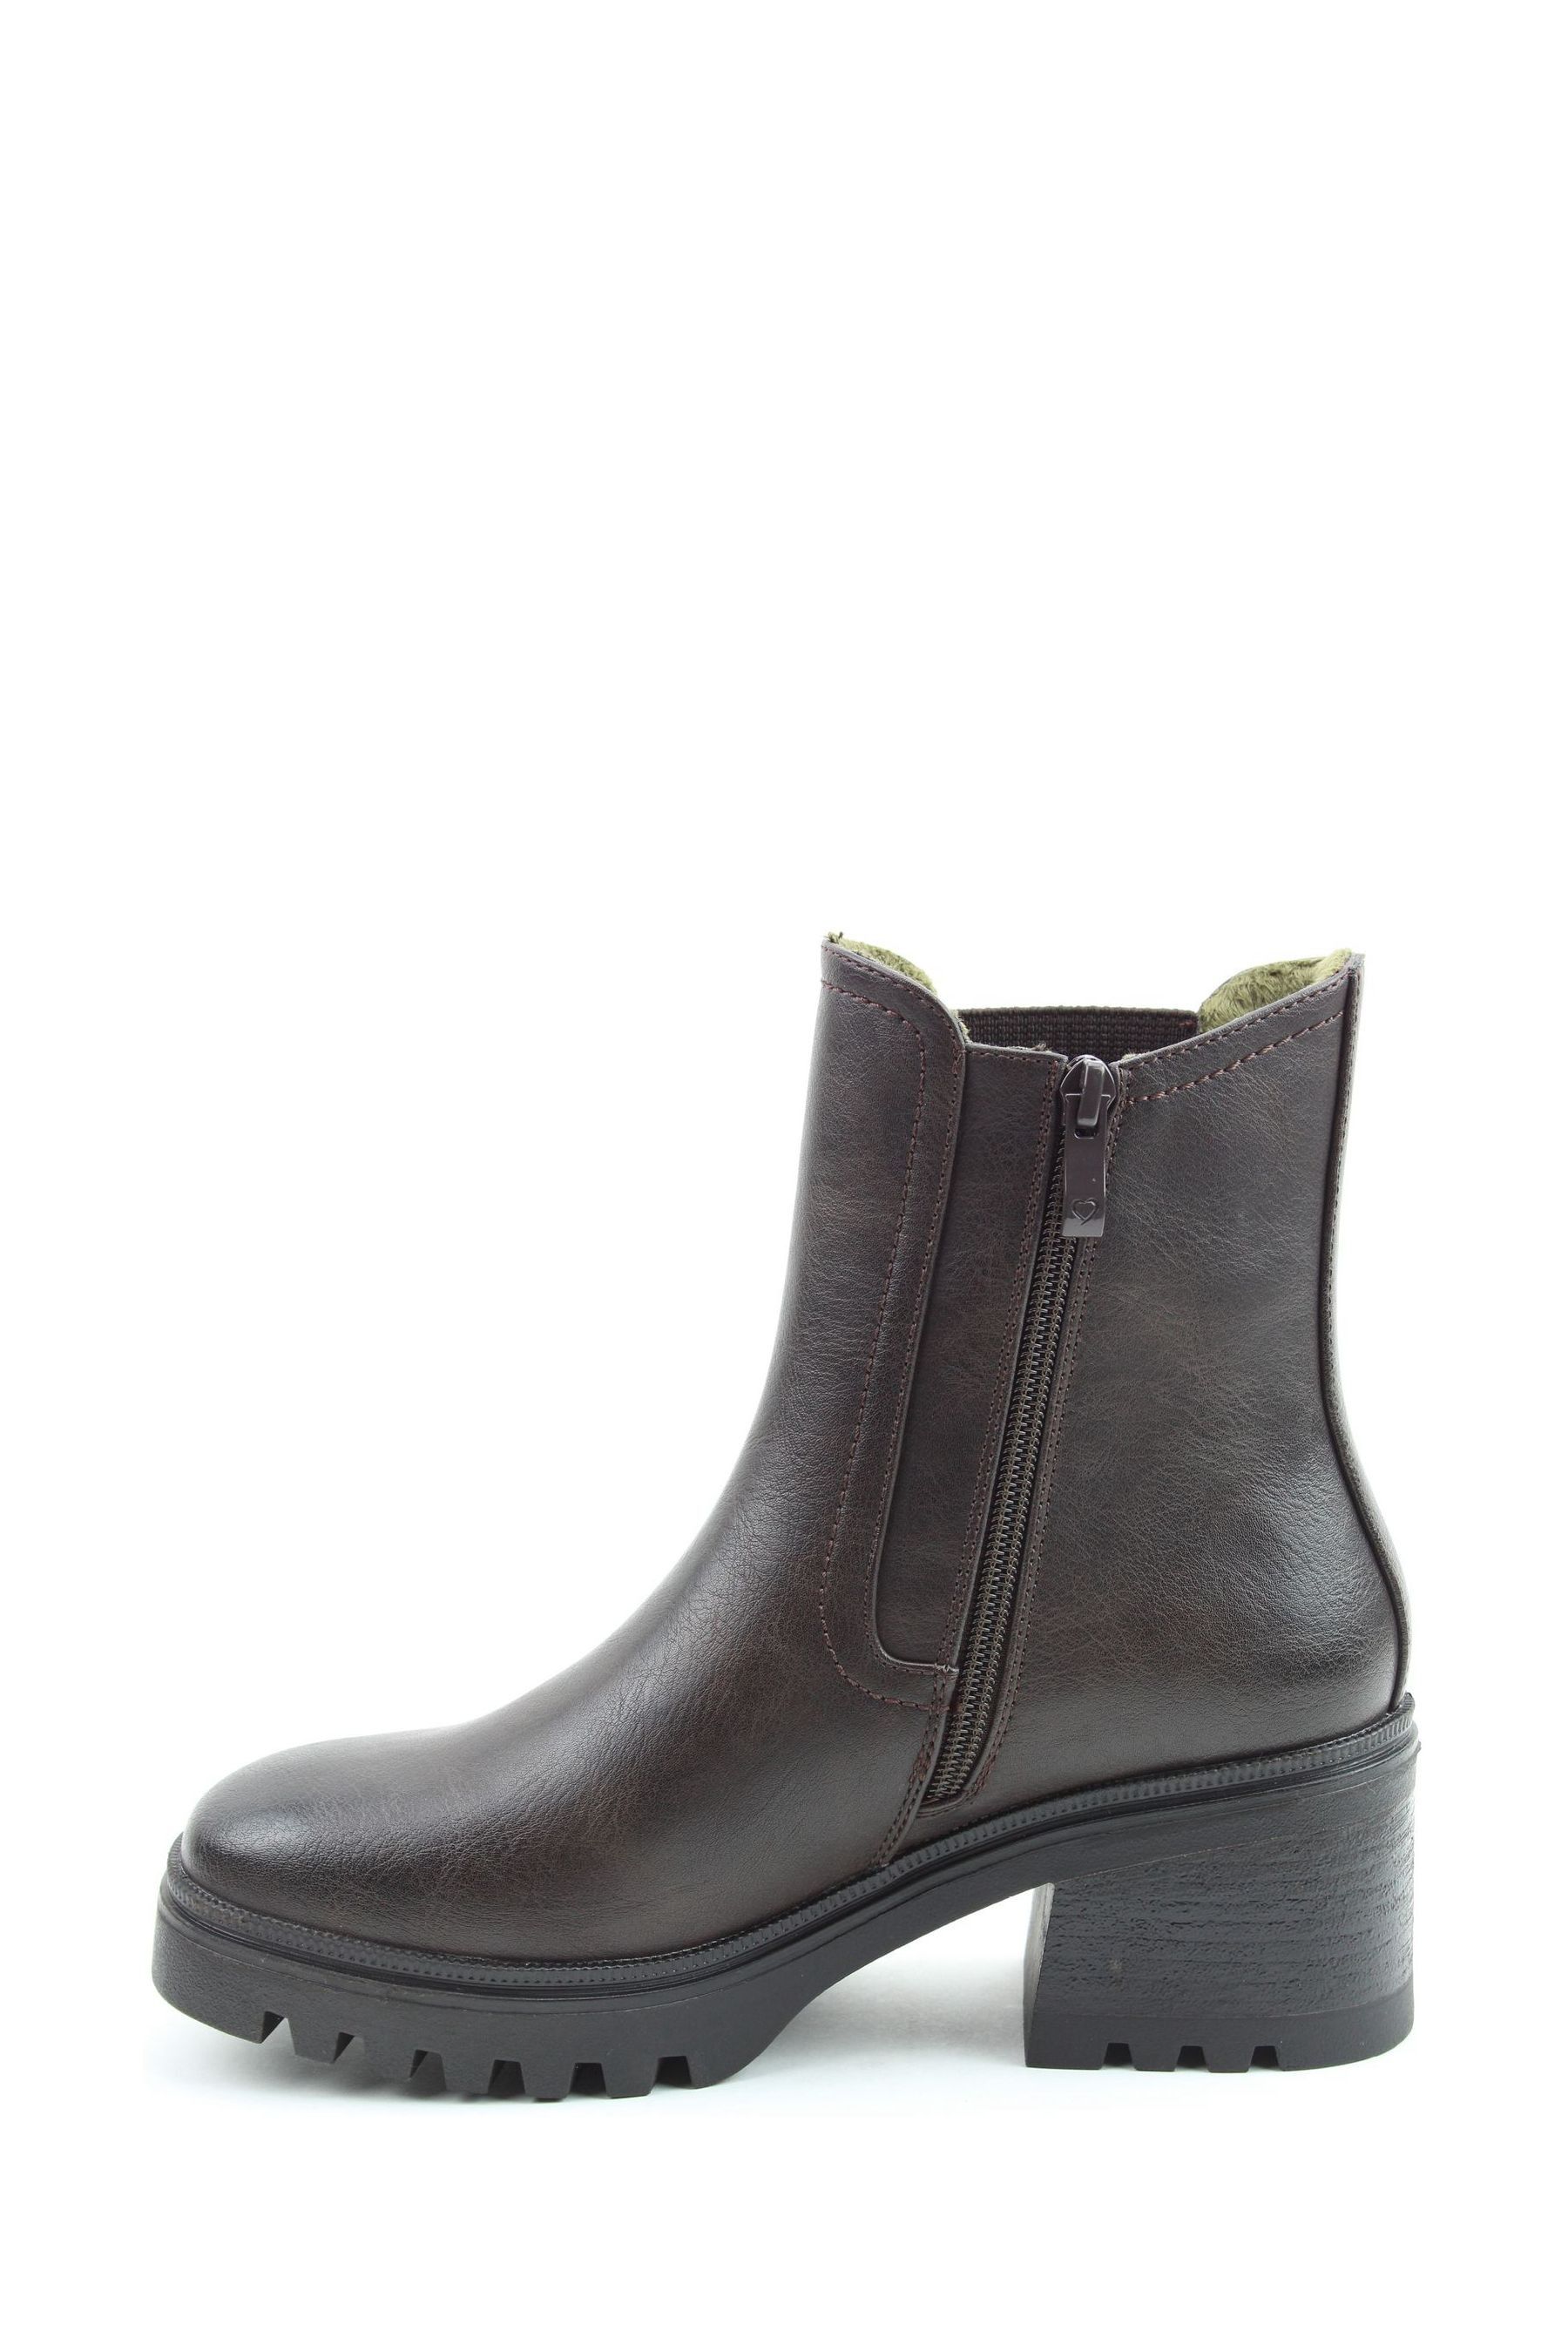 Buy Heavenly Feet Ladies Vegan Friendly Mid Boots from the Next UK ...